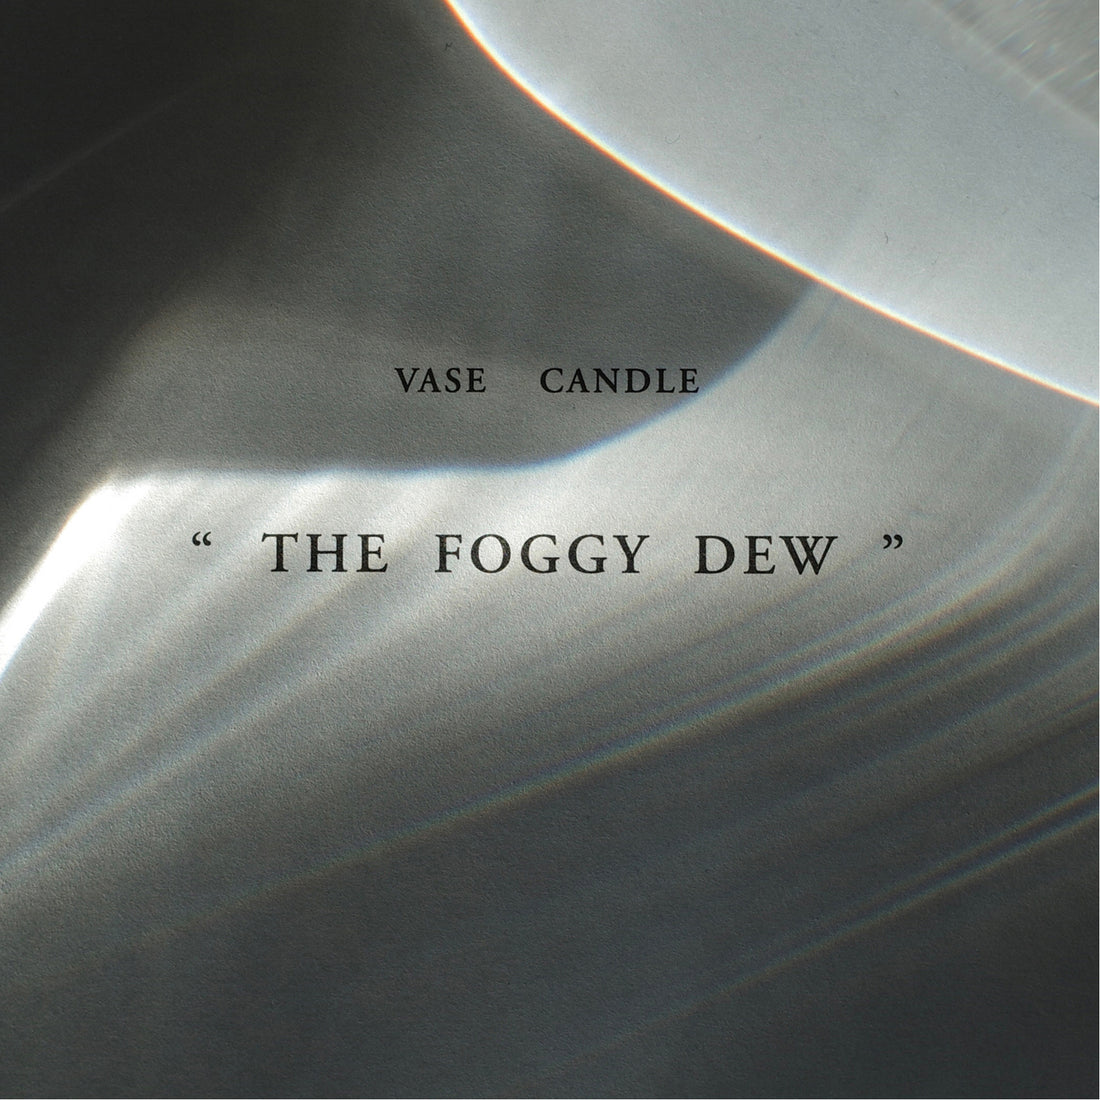 becandle-the-grey-green-vase-candle-400g-foggy-dew-gift-set